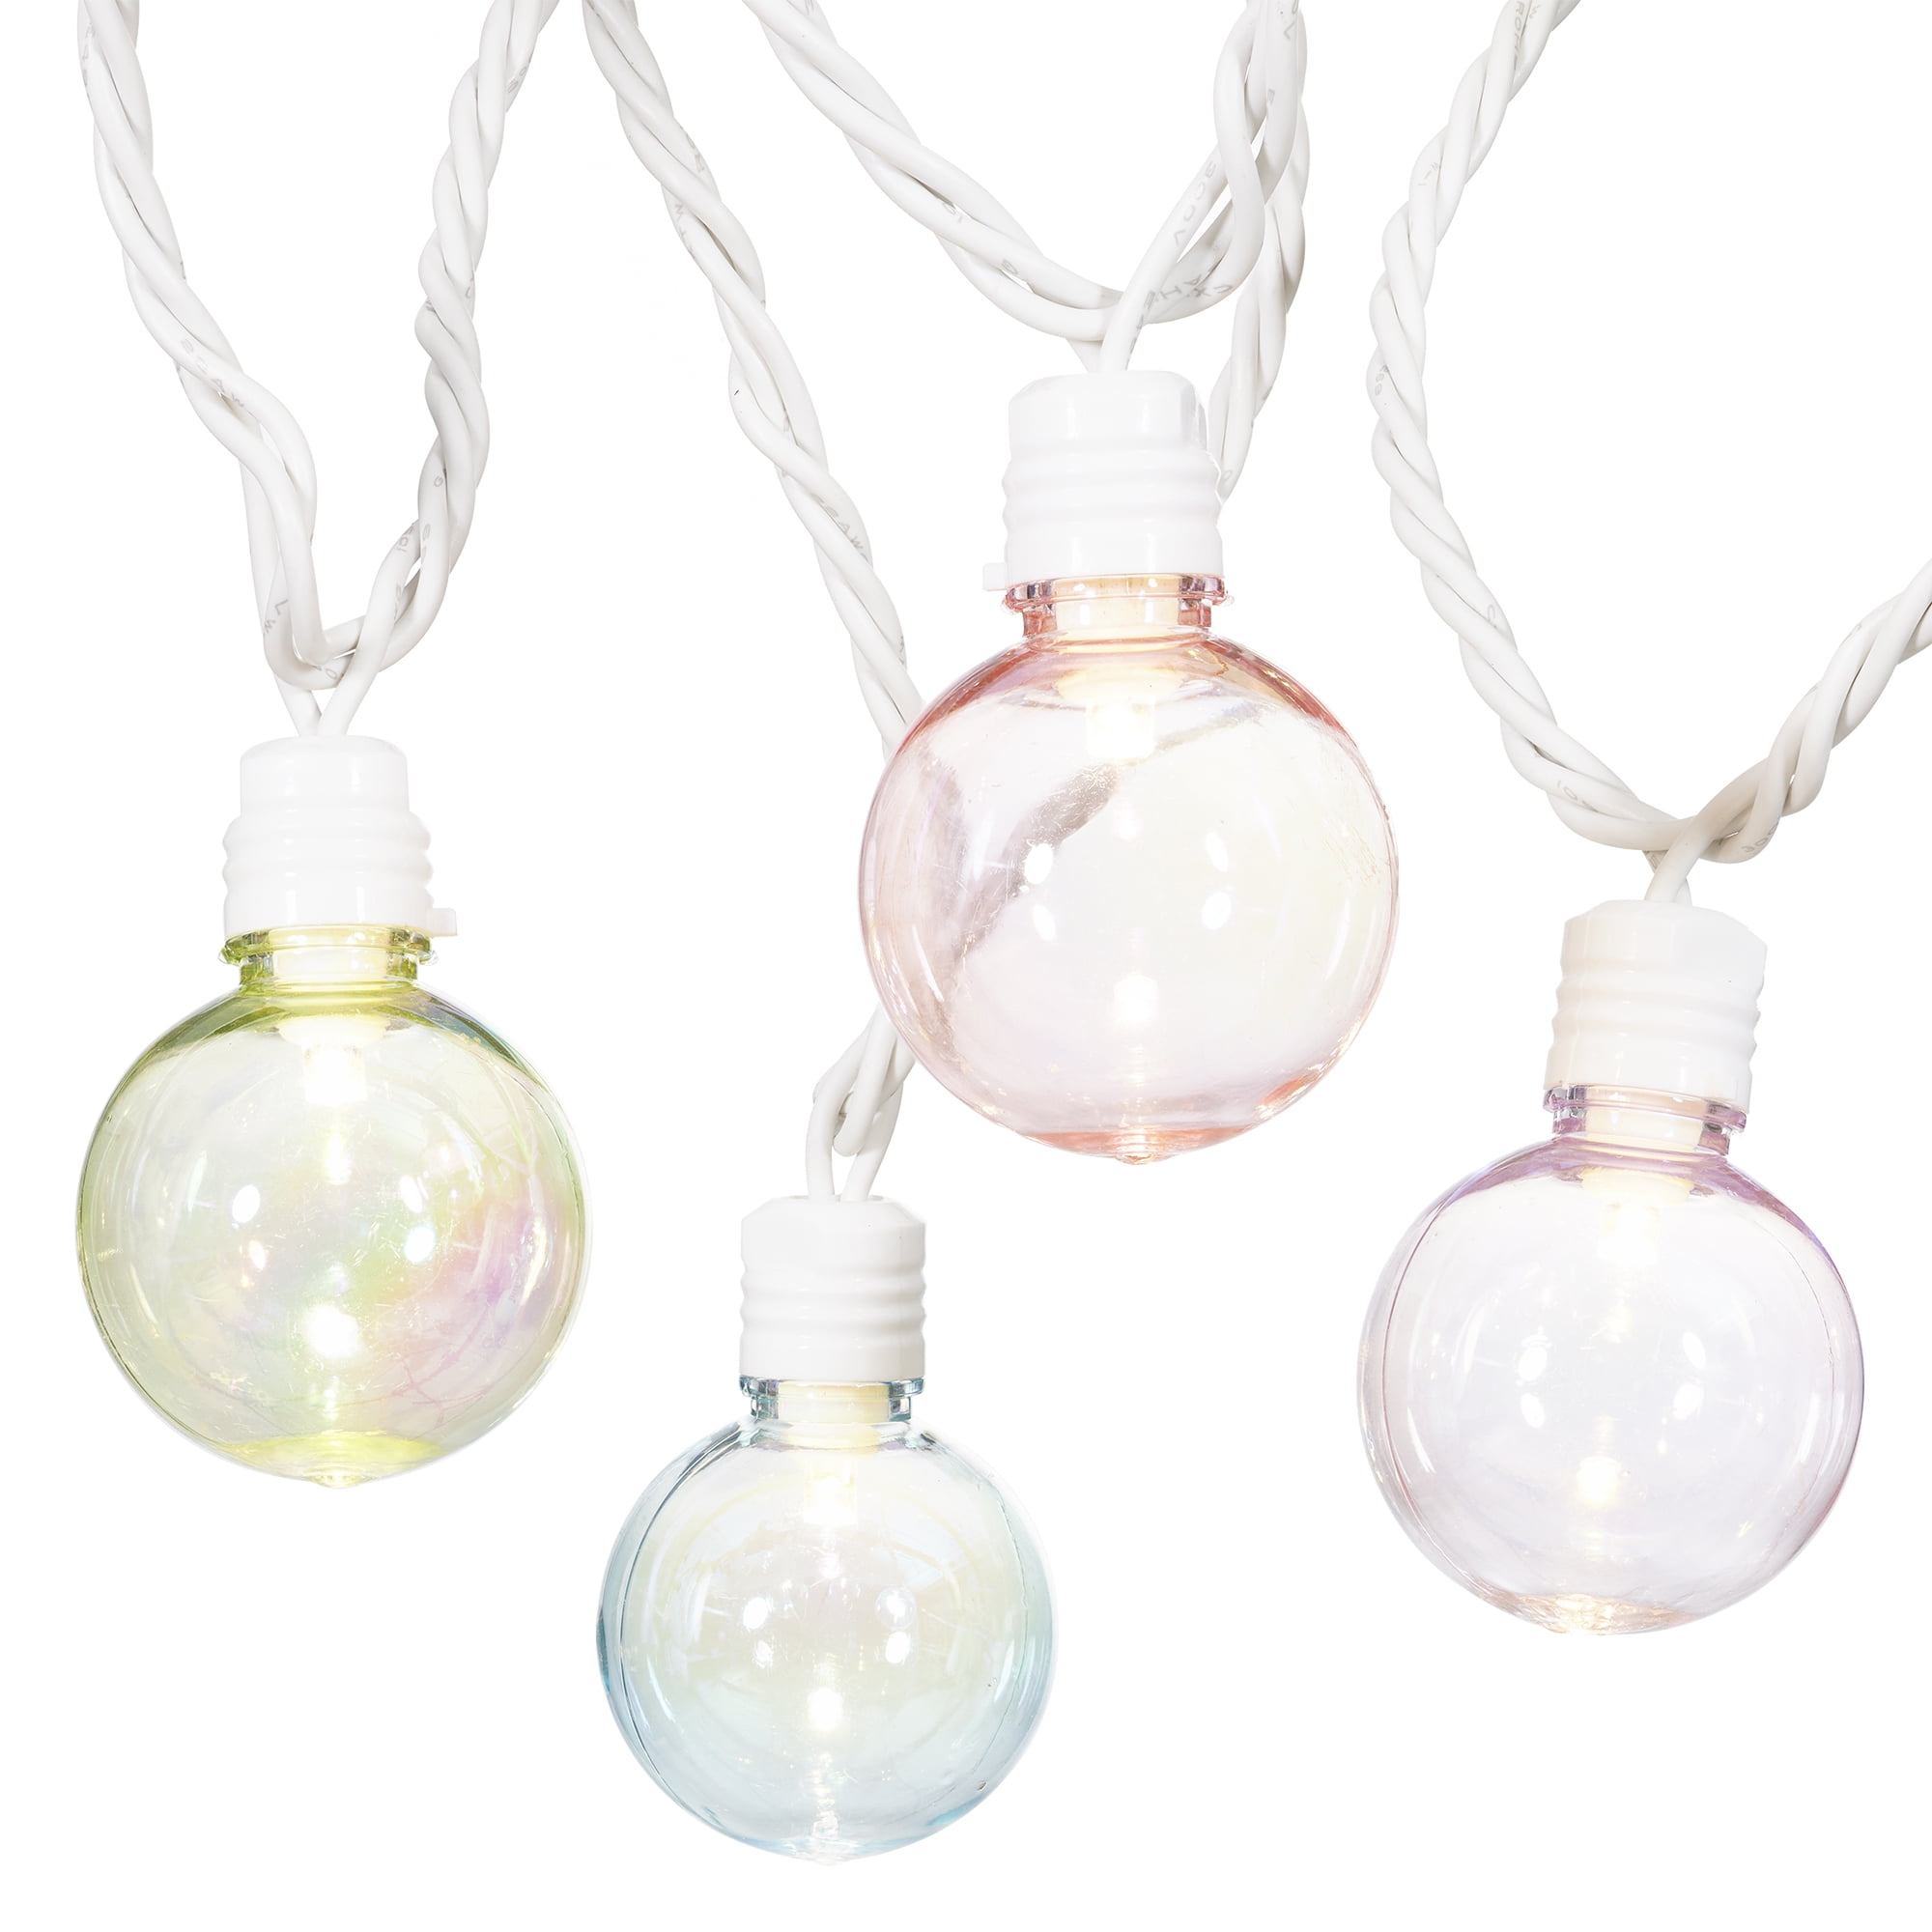 100 Foot White String Lights - G40 Clear Globe Bulbs (White Wire) - Outdoor  Indoor String Lights for Wedding, Bistro, Market, Cafe, Bedroom and Tent